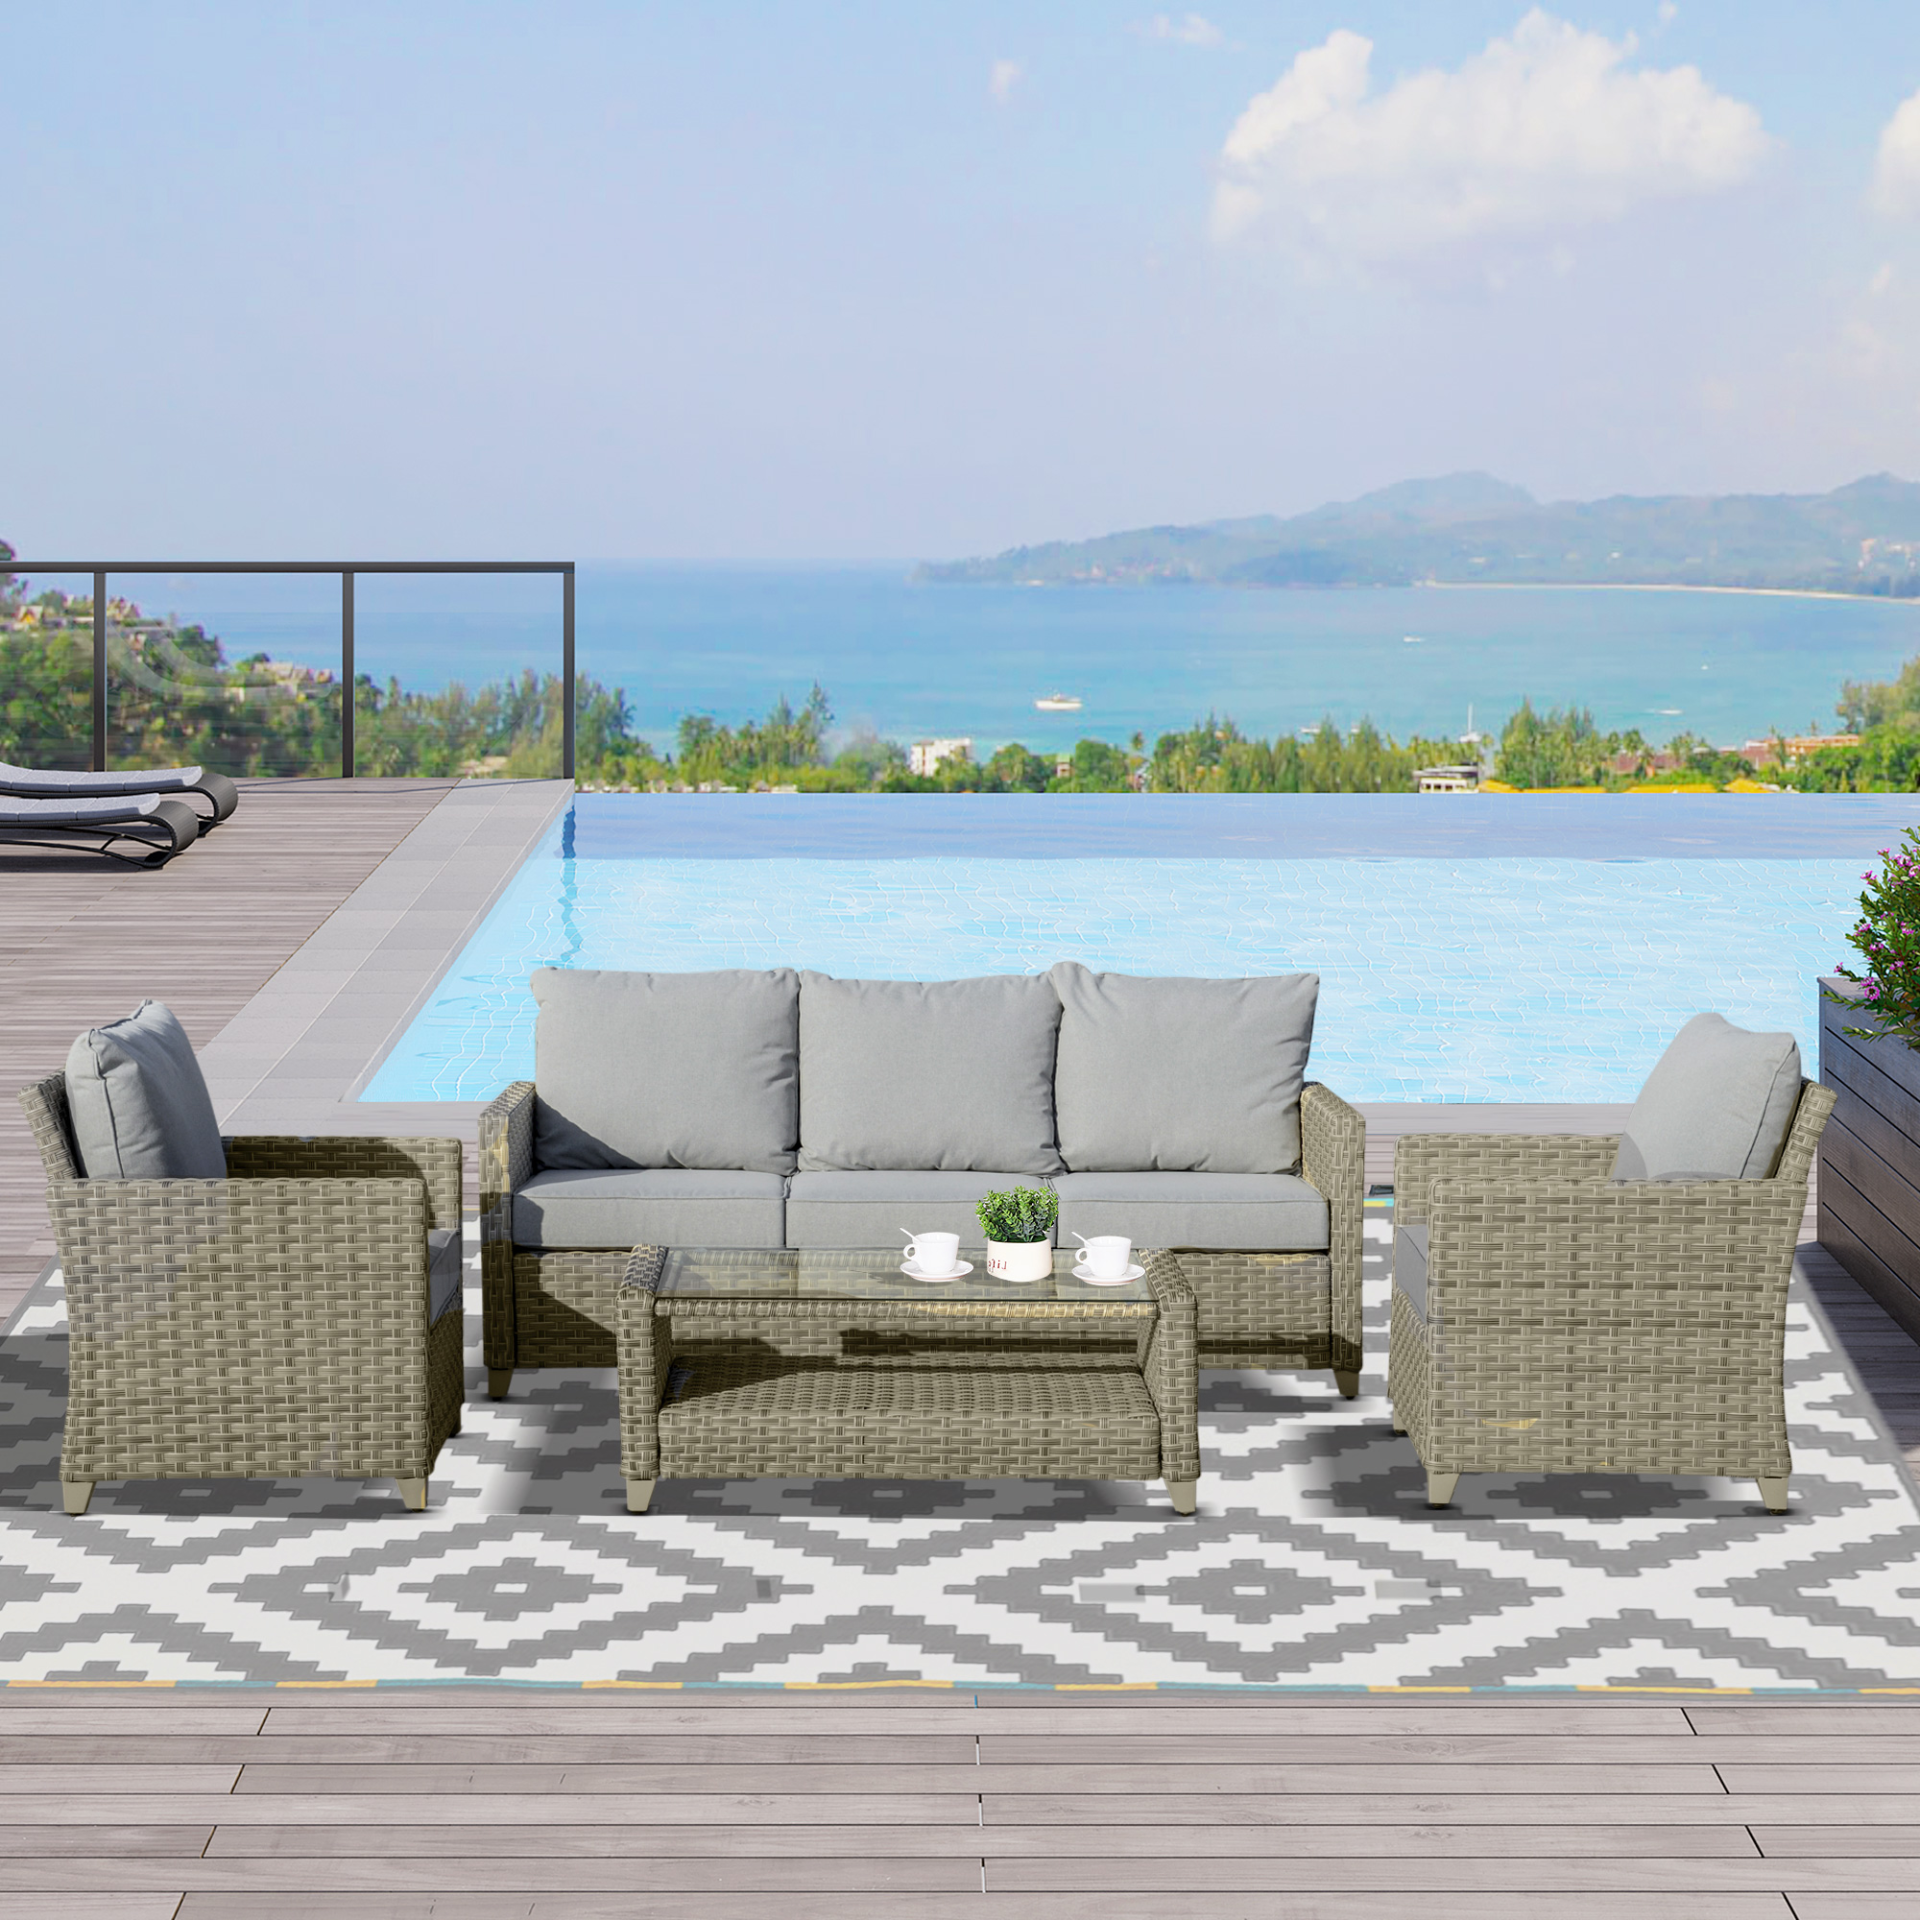 Outsunny 4 Pieces Patio Wicker Sofa Set, Outdoor PE Rattan Sectional Conversation Aluminium Frame Furniture Set w/ Padded Cushion & 2-Tier Tea Table, Brown